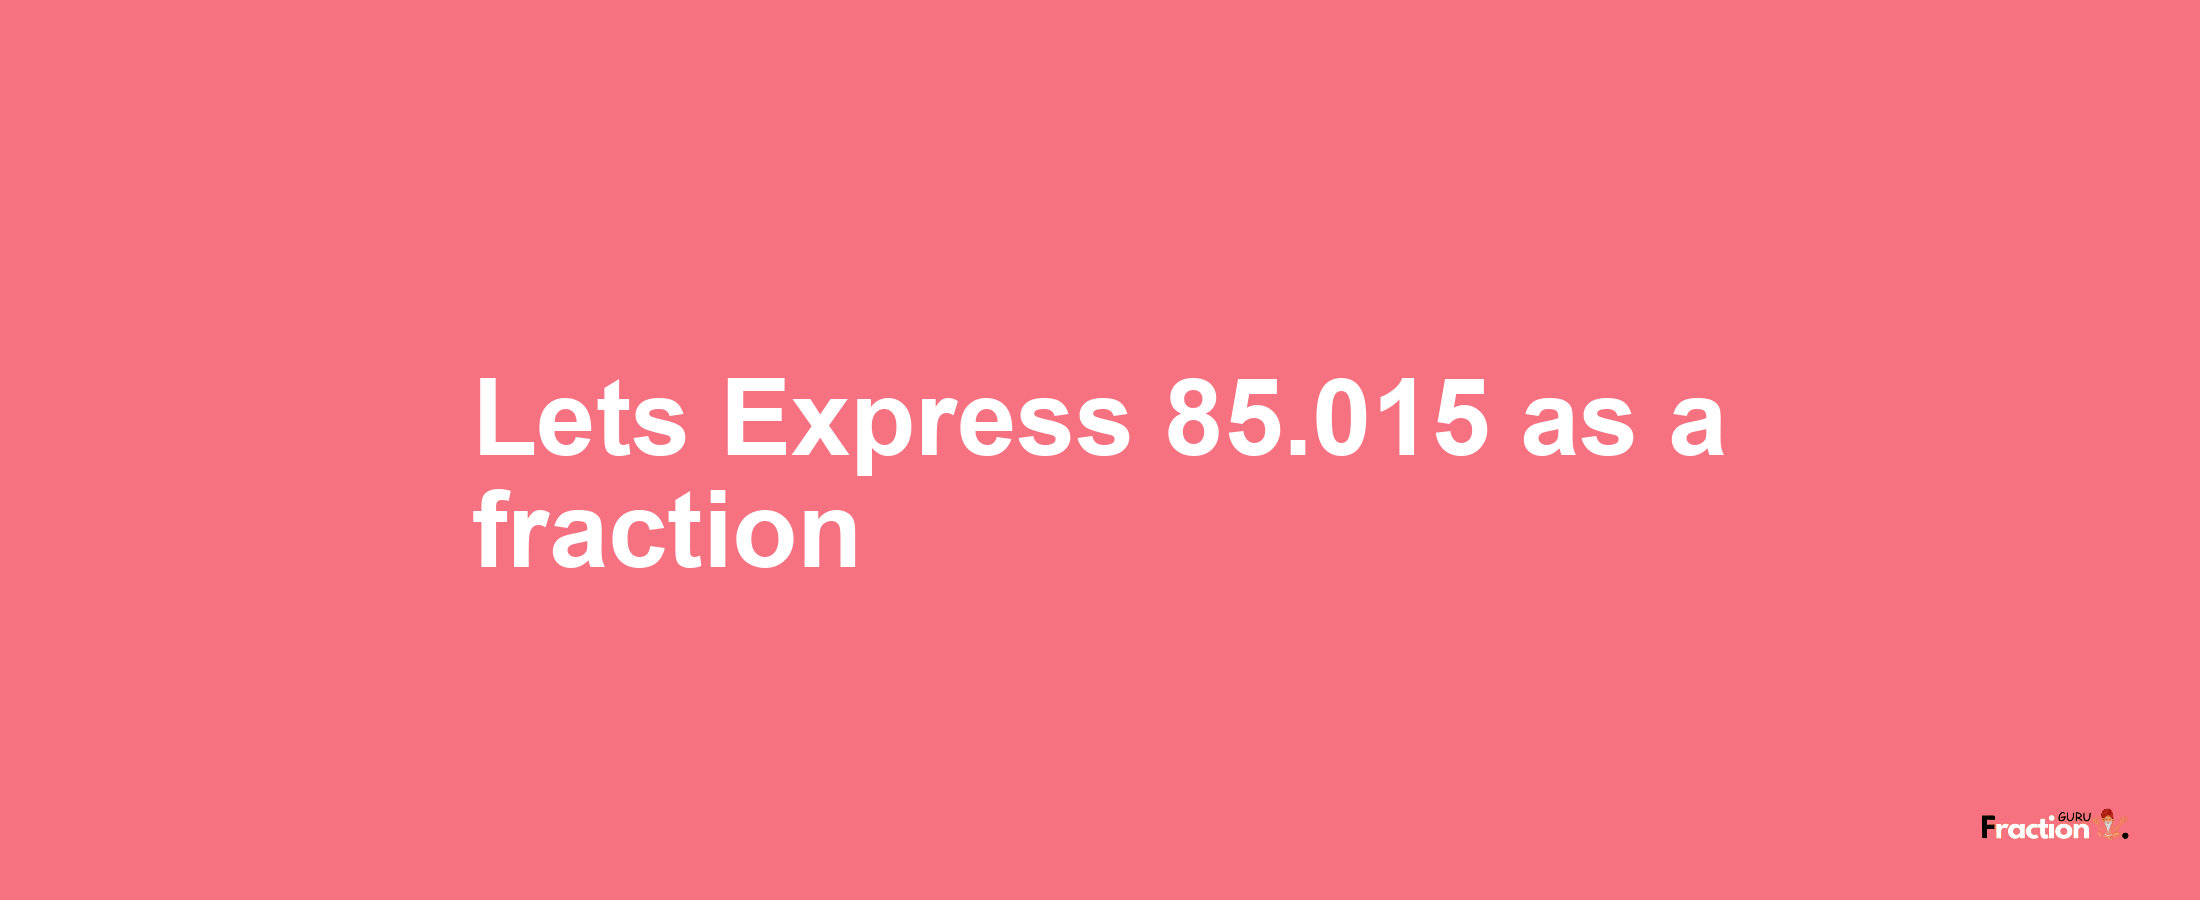 Lets Express 85.015 as afraction